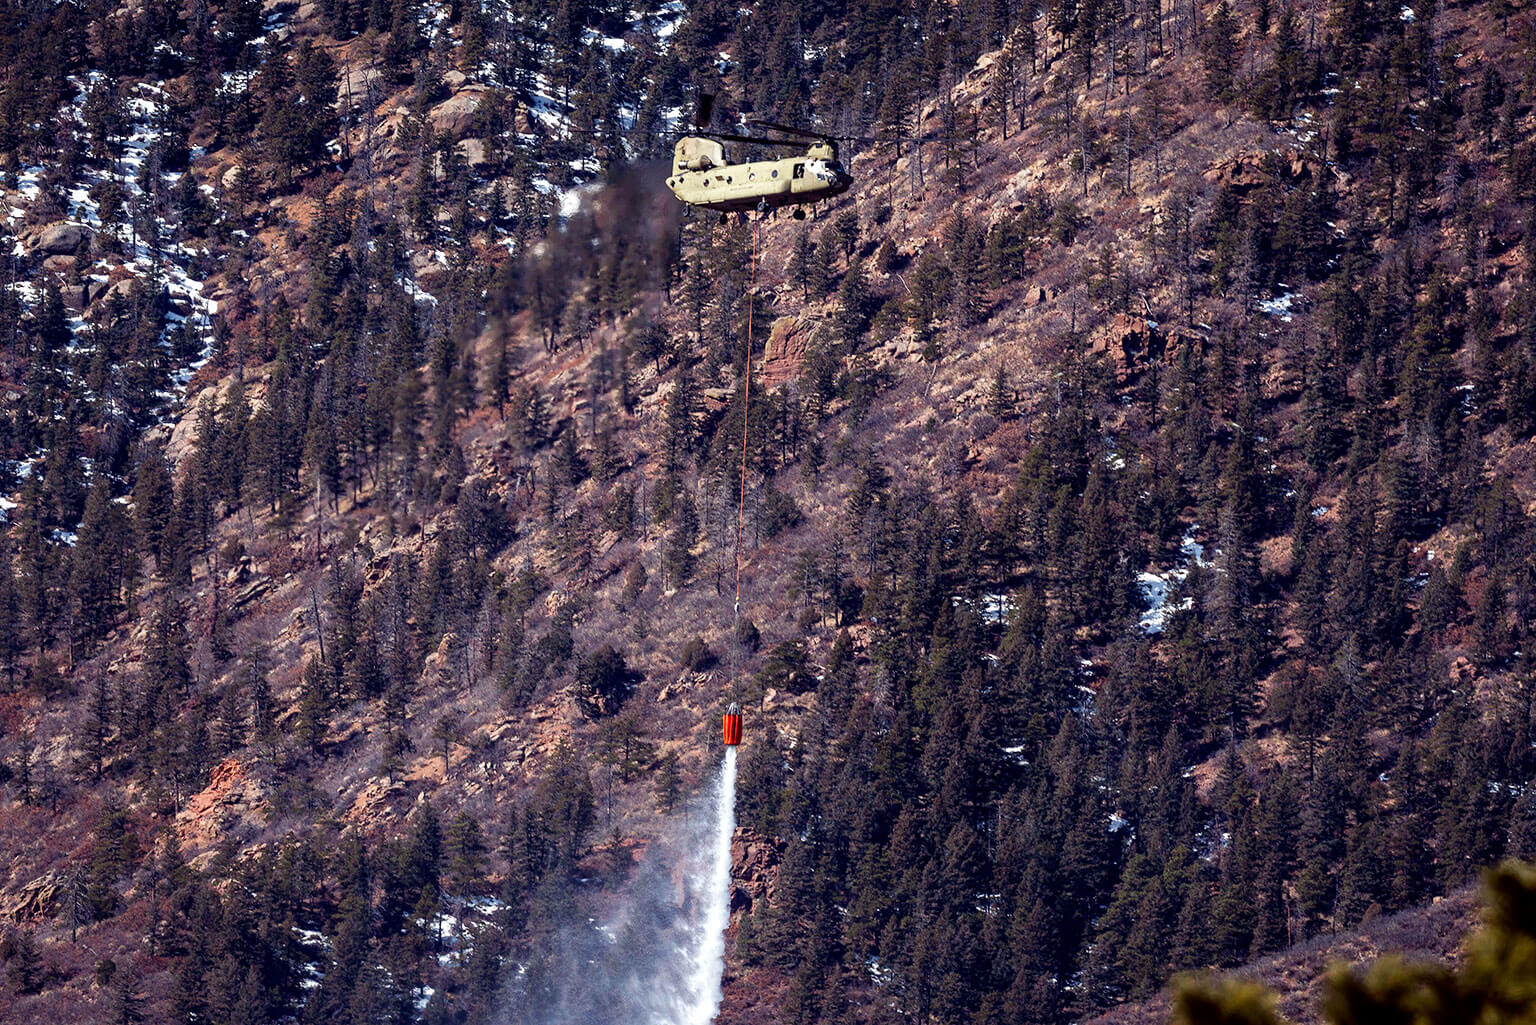 An Army CH-47 Chinook from Fort Carson, Colorado drops water on the West Monument Creek Fire.